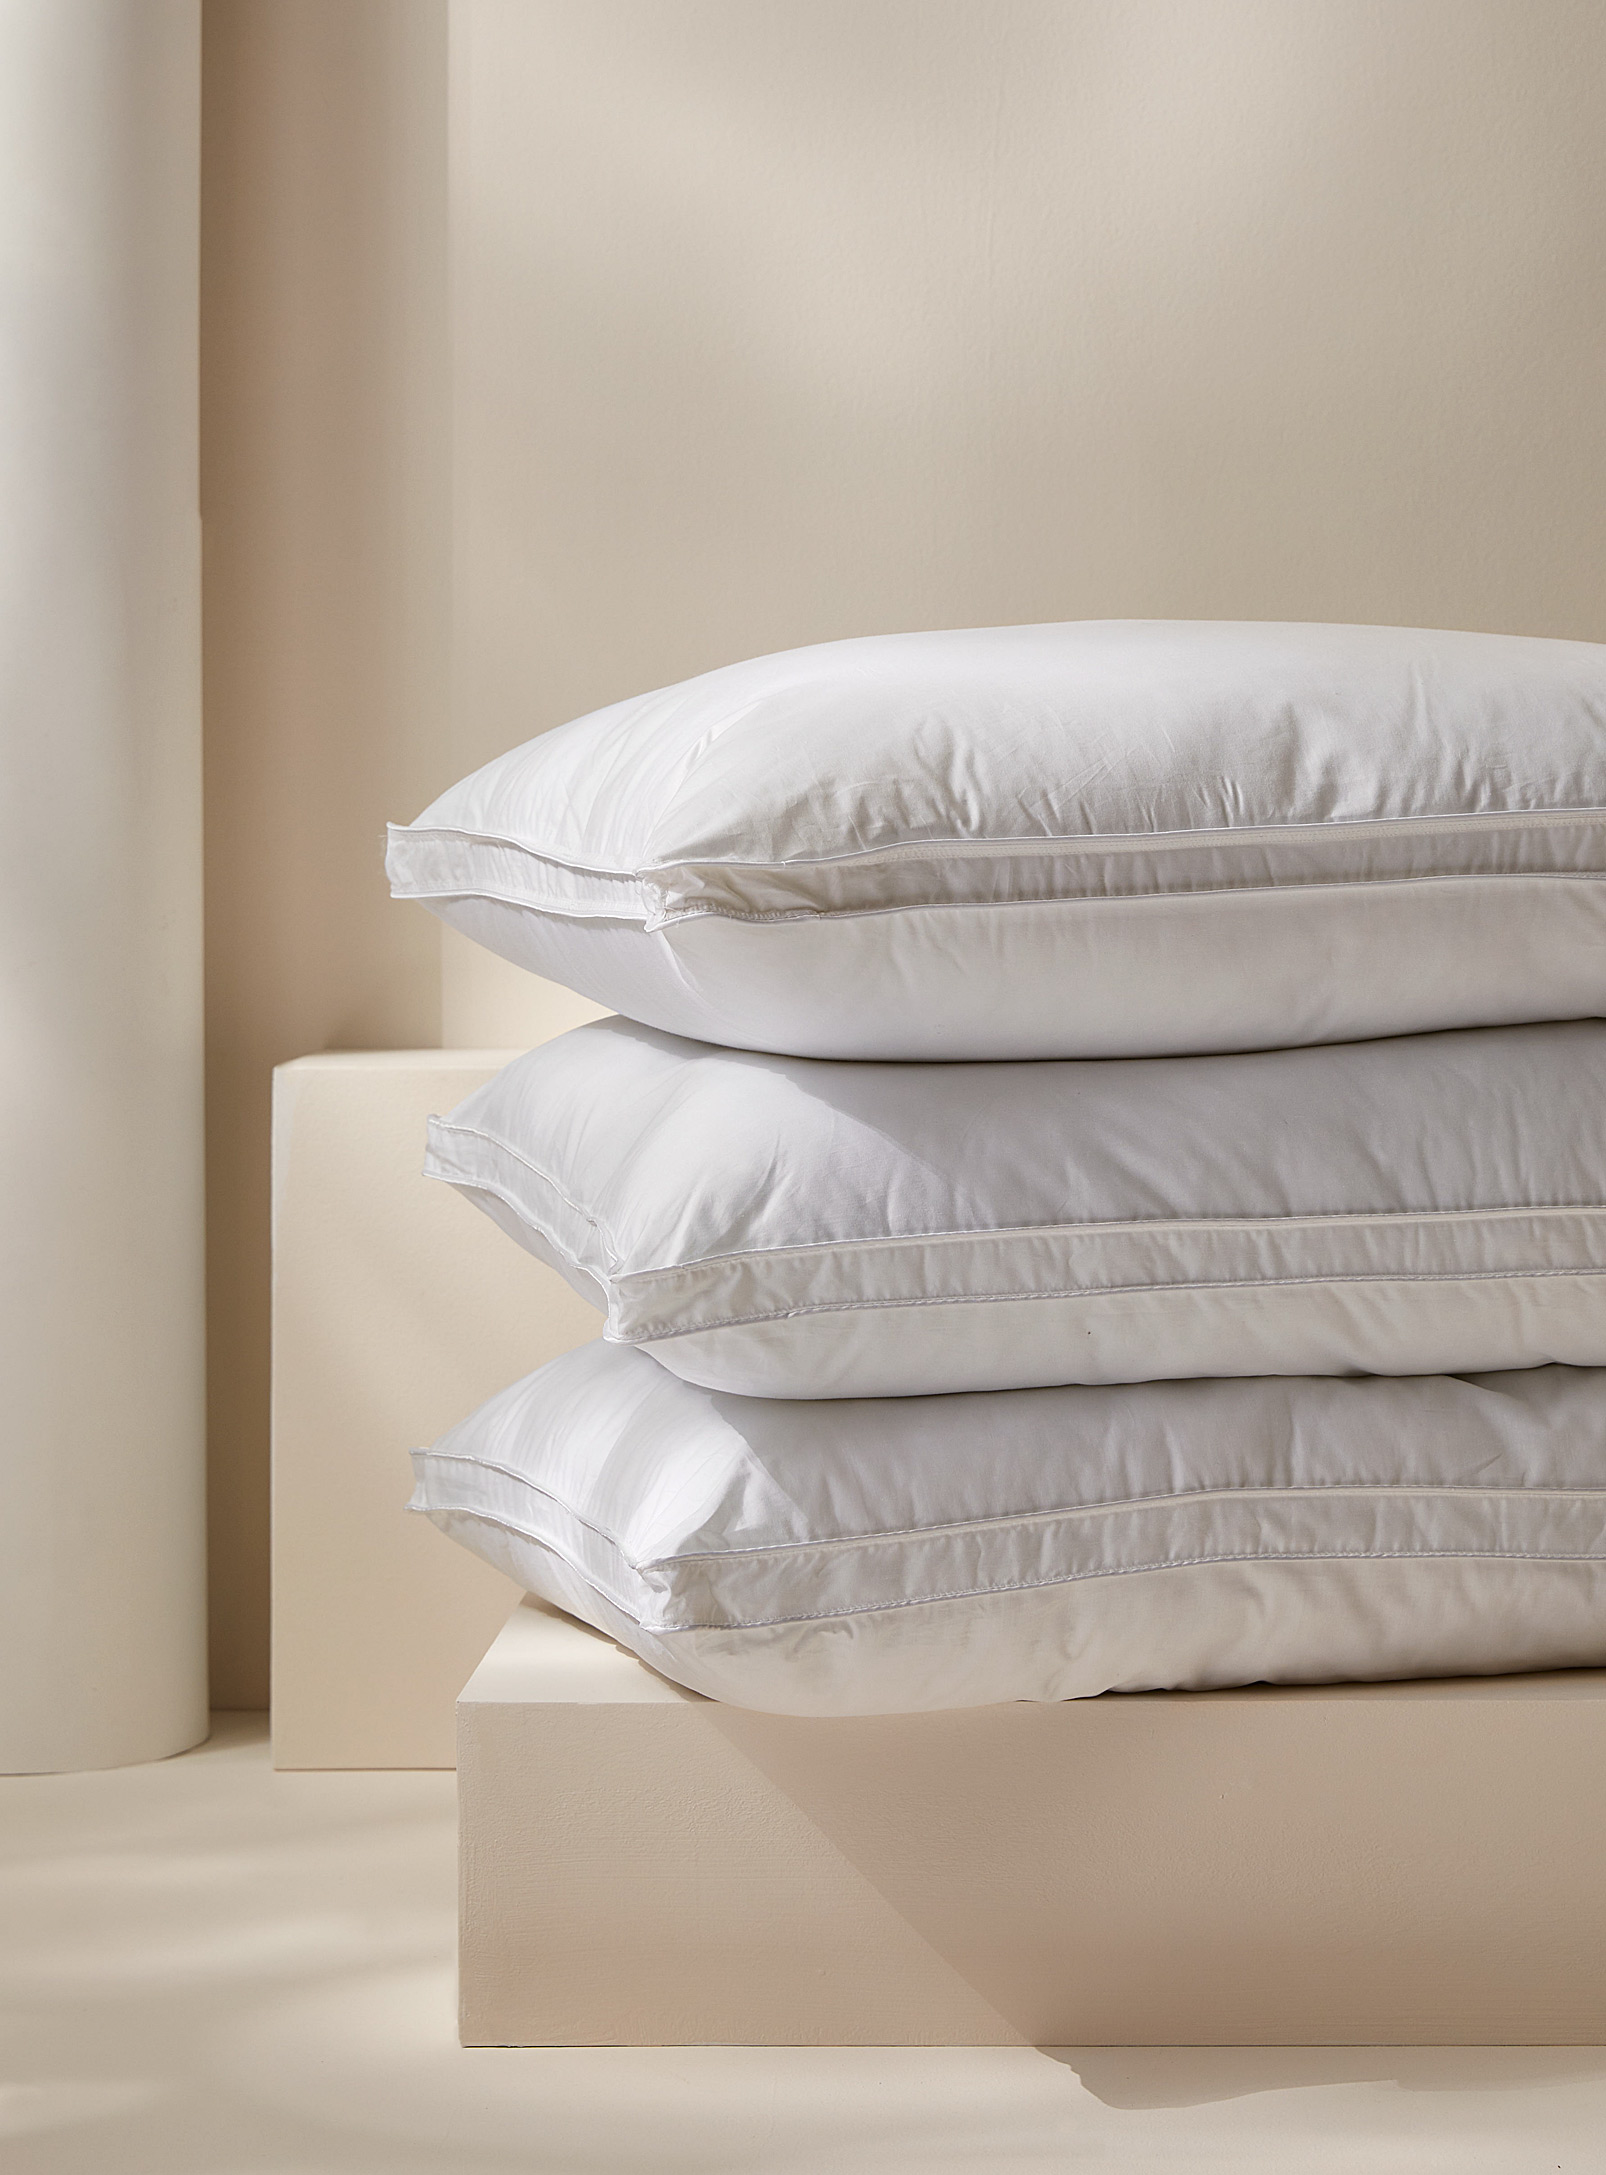 Simons Maison Recycled Polyester Duvetine Pillow Semi-firm Support In White